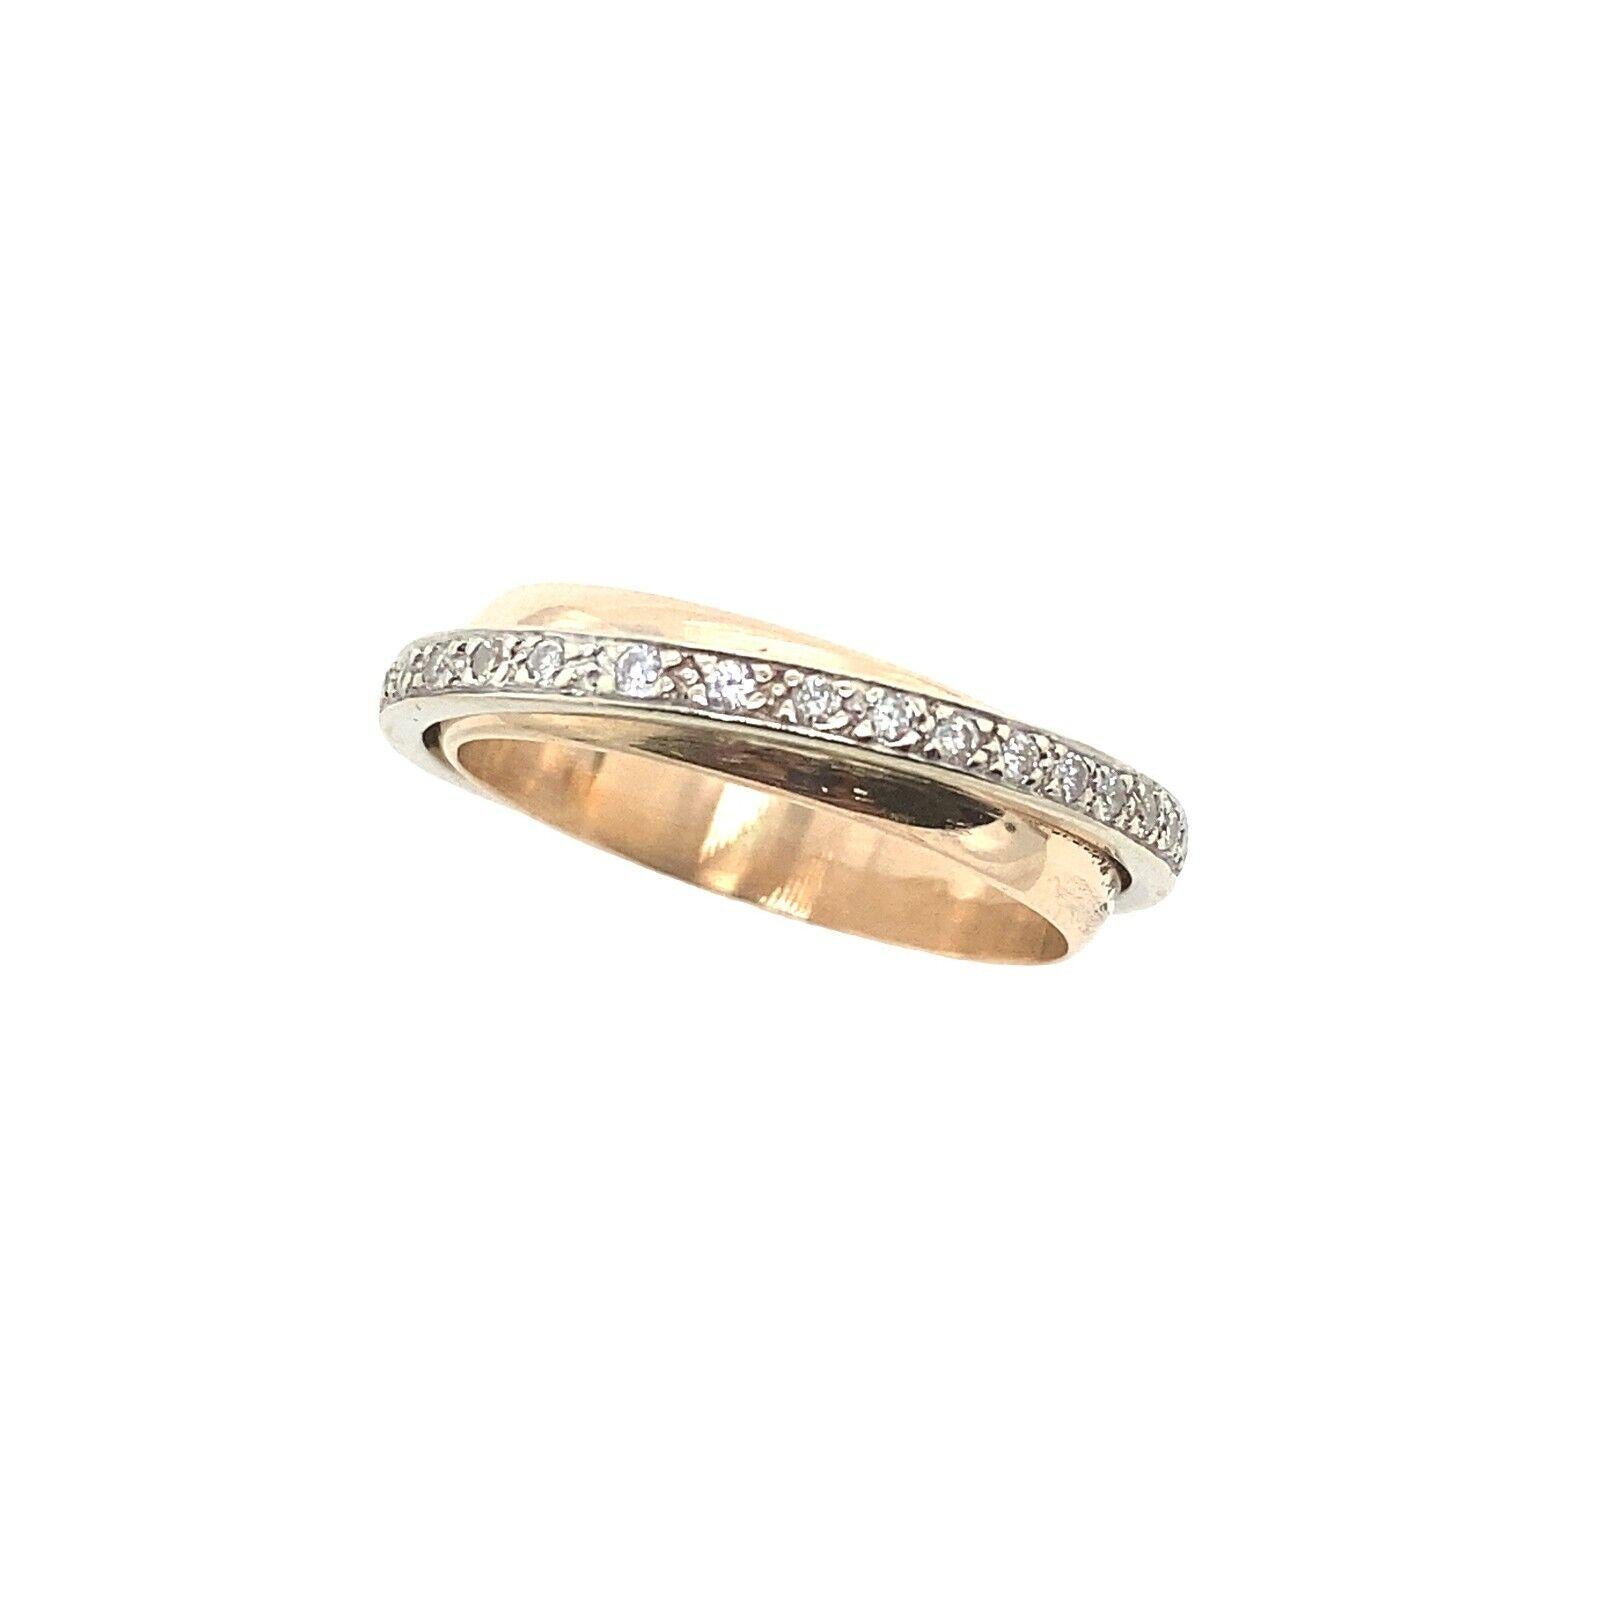 This stunning wedding band in 9ct rose and white gold features a 0.30ct total weight of H SI2 diamonds. The shimmering round brilliant stones complement seamlessly with the rose gold-tone; making it a romantic wedding band.

Additional